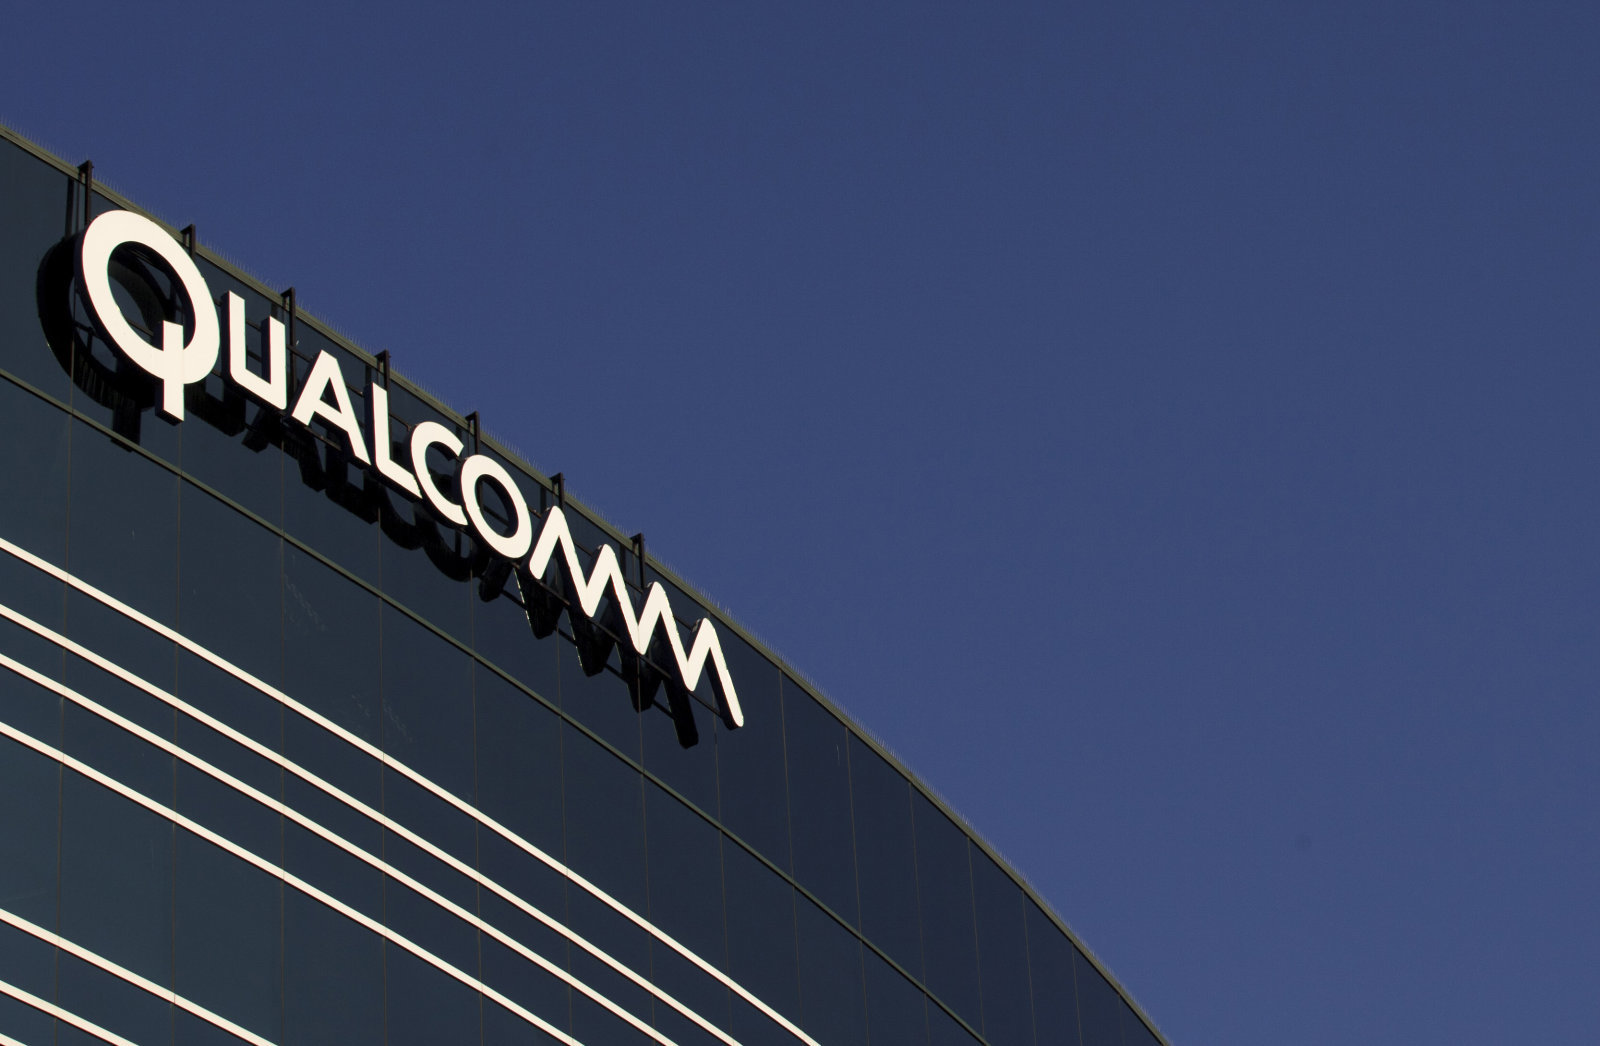 https://www.cnbc.com/2018/12/20/qualcomm-reportedly-wins-injunction-against-apple-in-munich.html